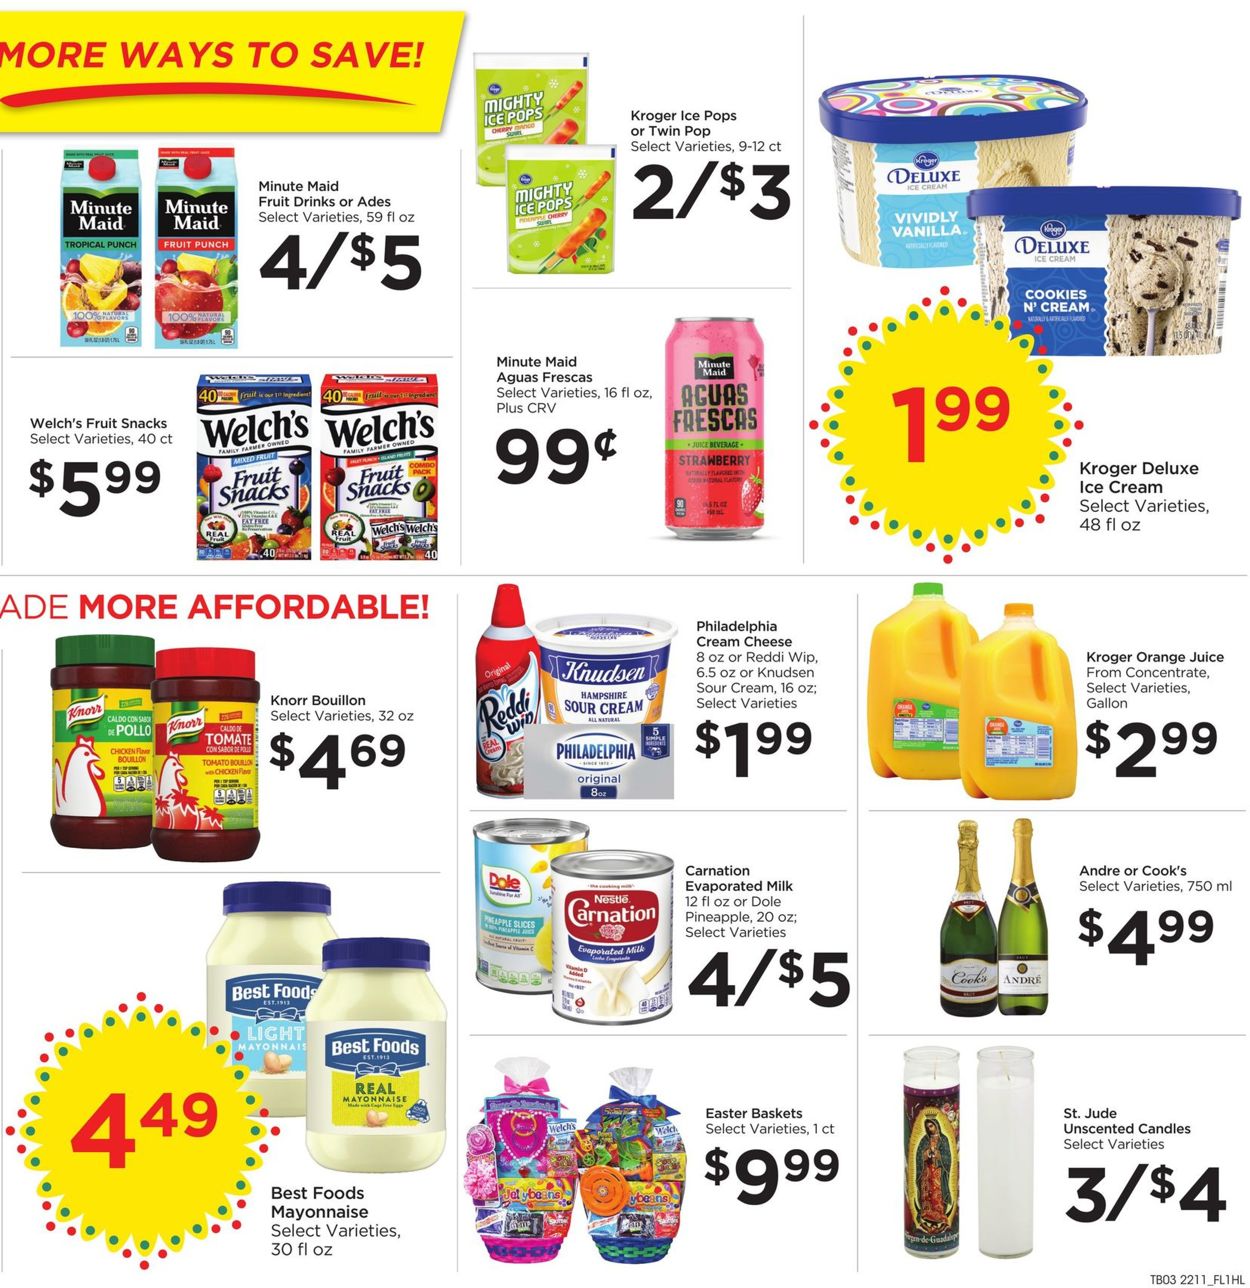 Catalogue Food 4 Less EASTER 2022 from 04/13/2022